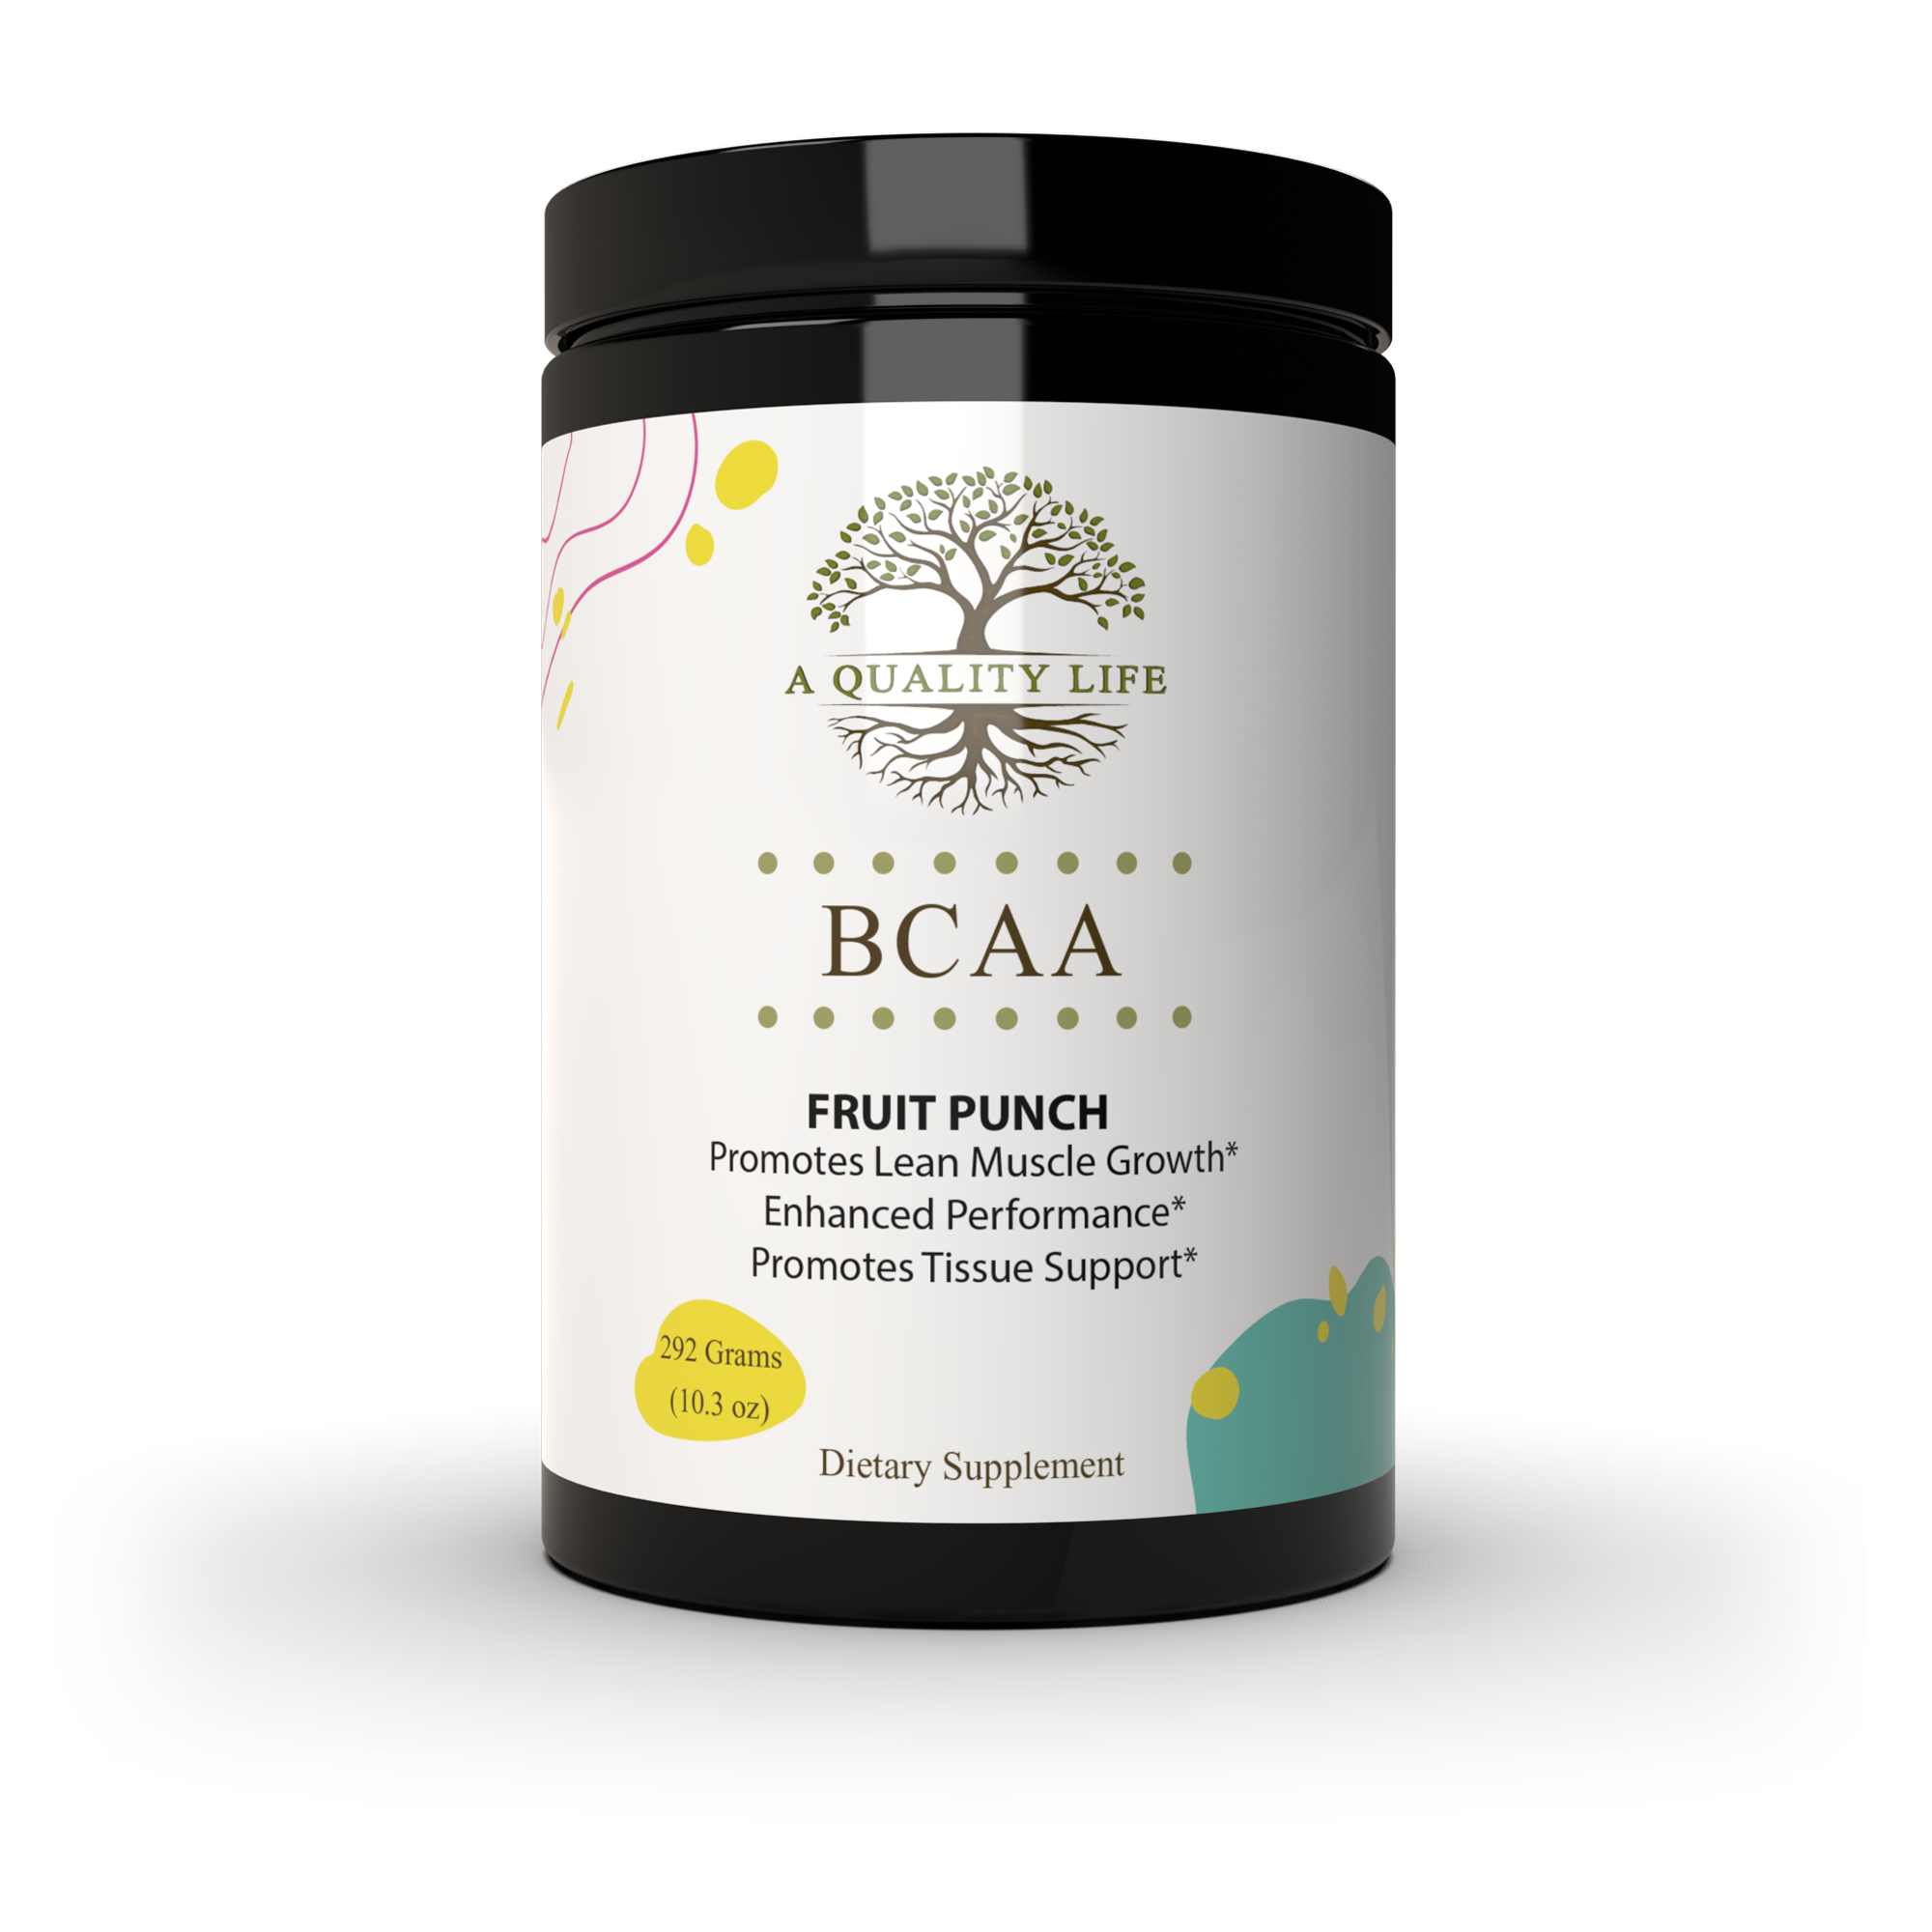 BCAA Fruit Punch - Optimal Muscle Recovery & Growth